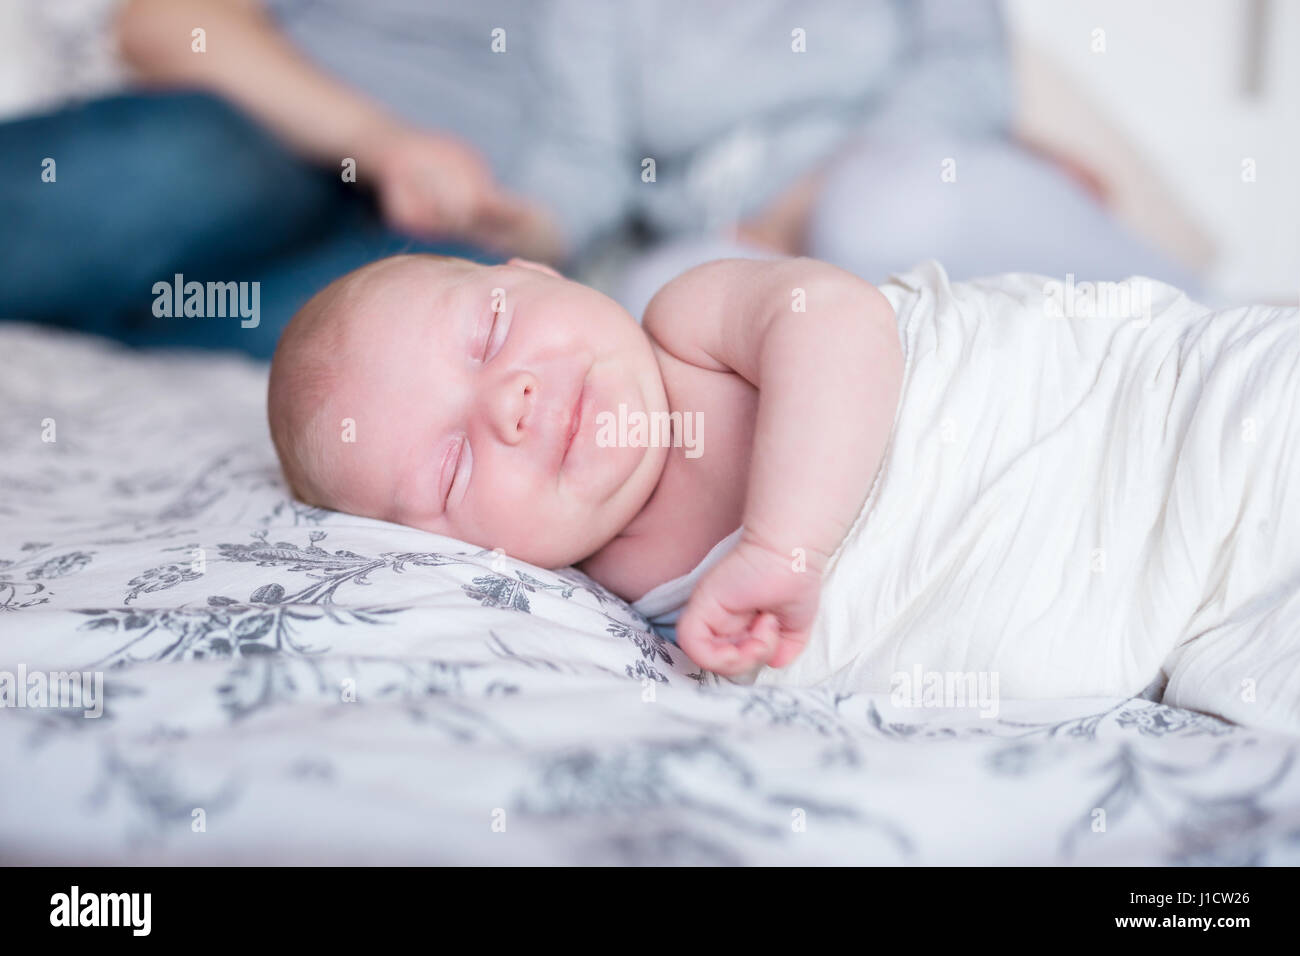 Young parents resting in bed, their newborn daughter sleeping in th e foreground. Stock Photo